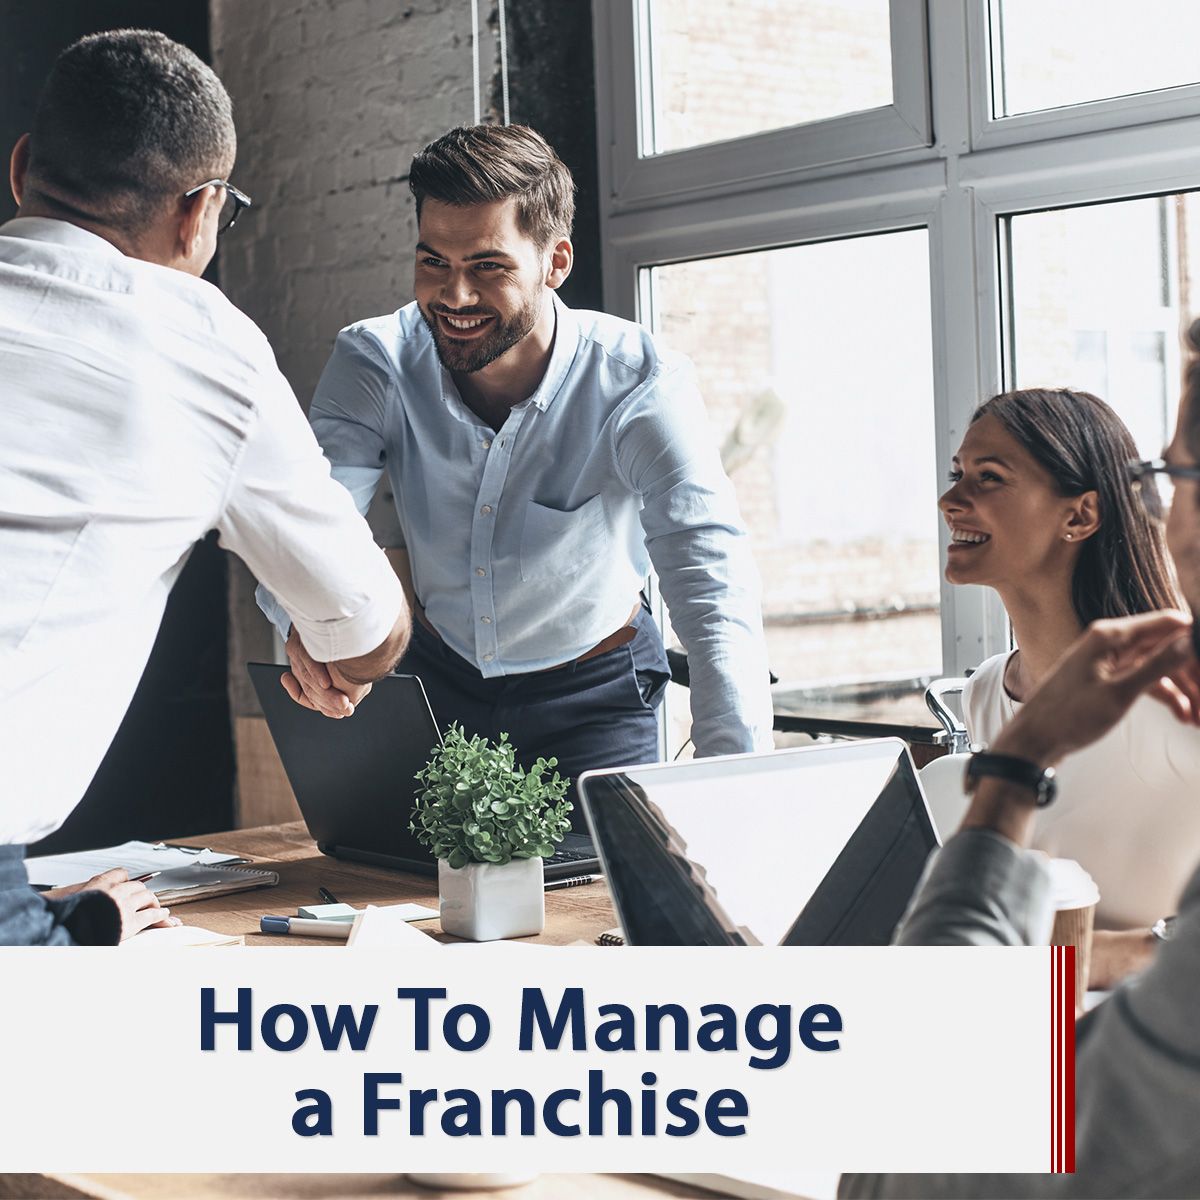 How To Manage a Franchise